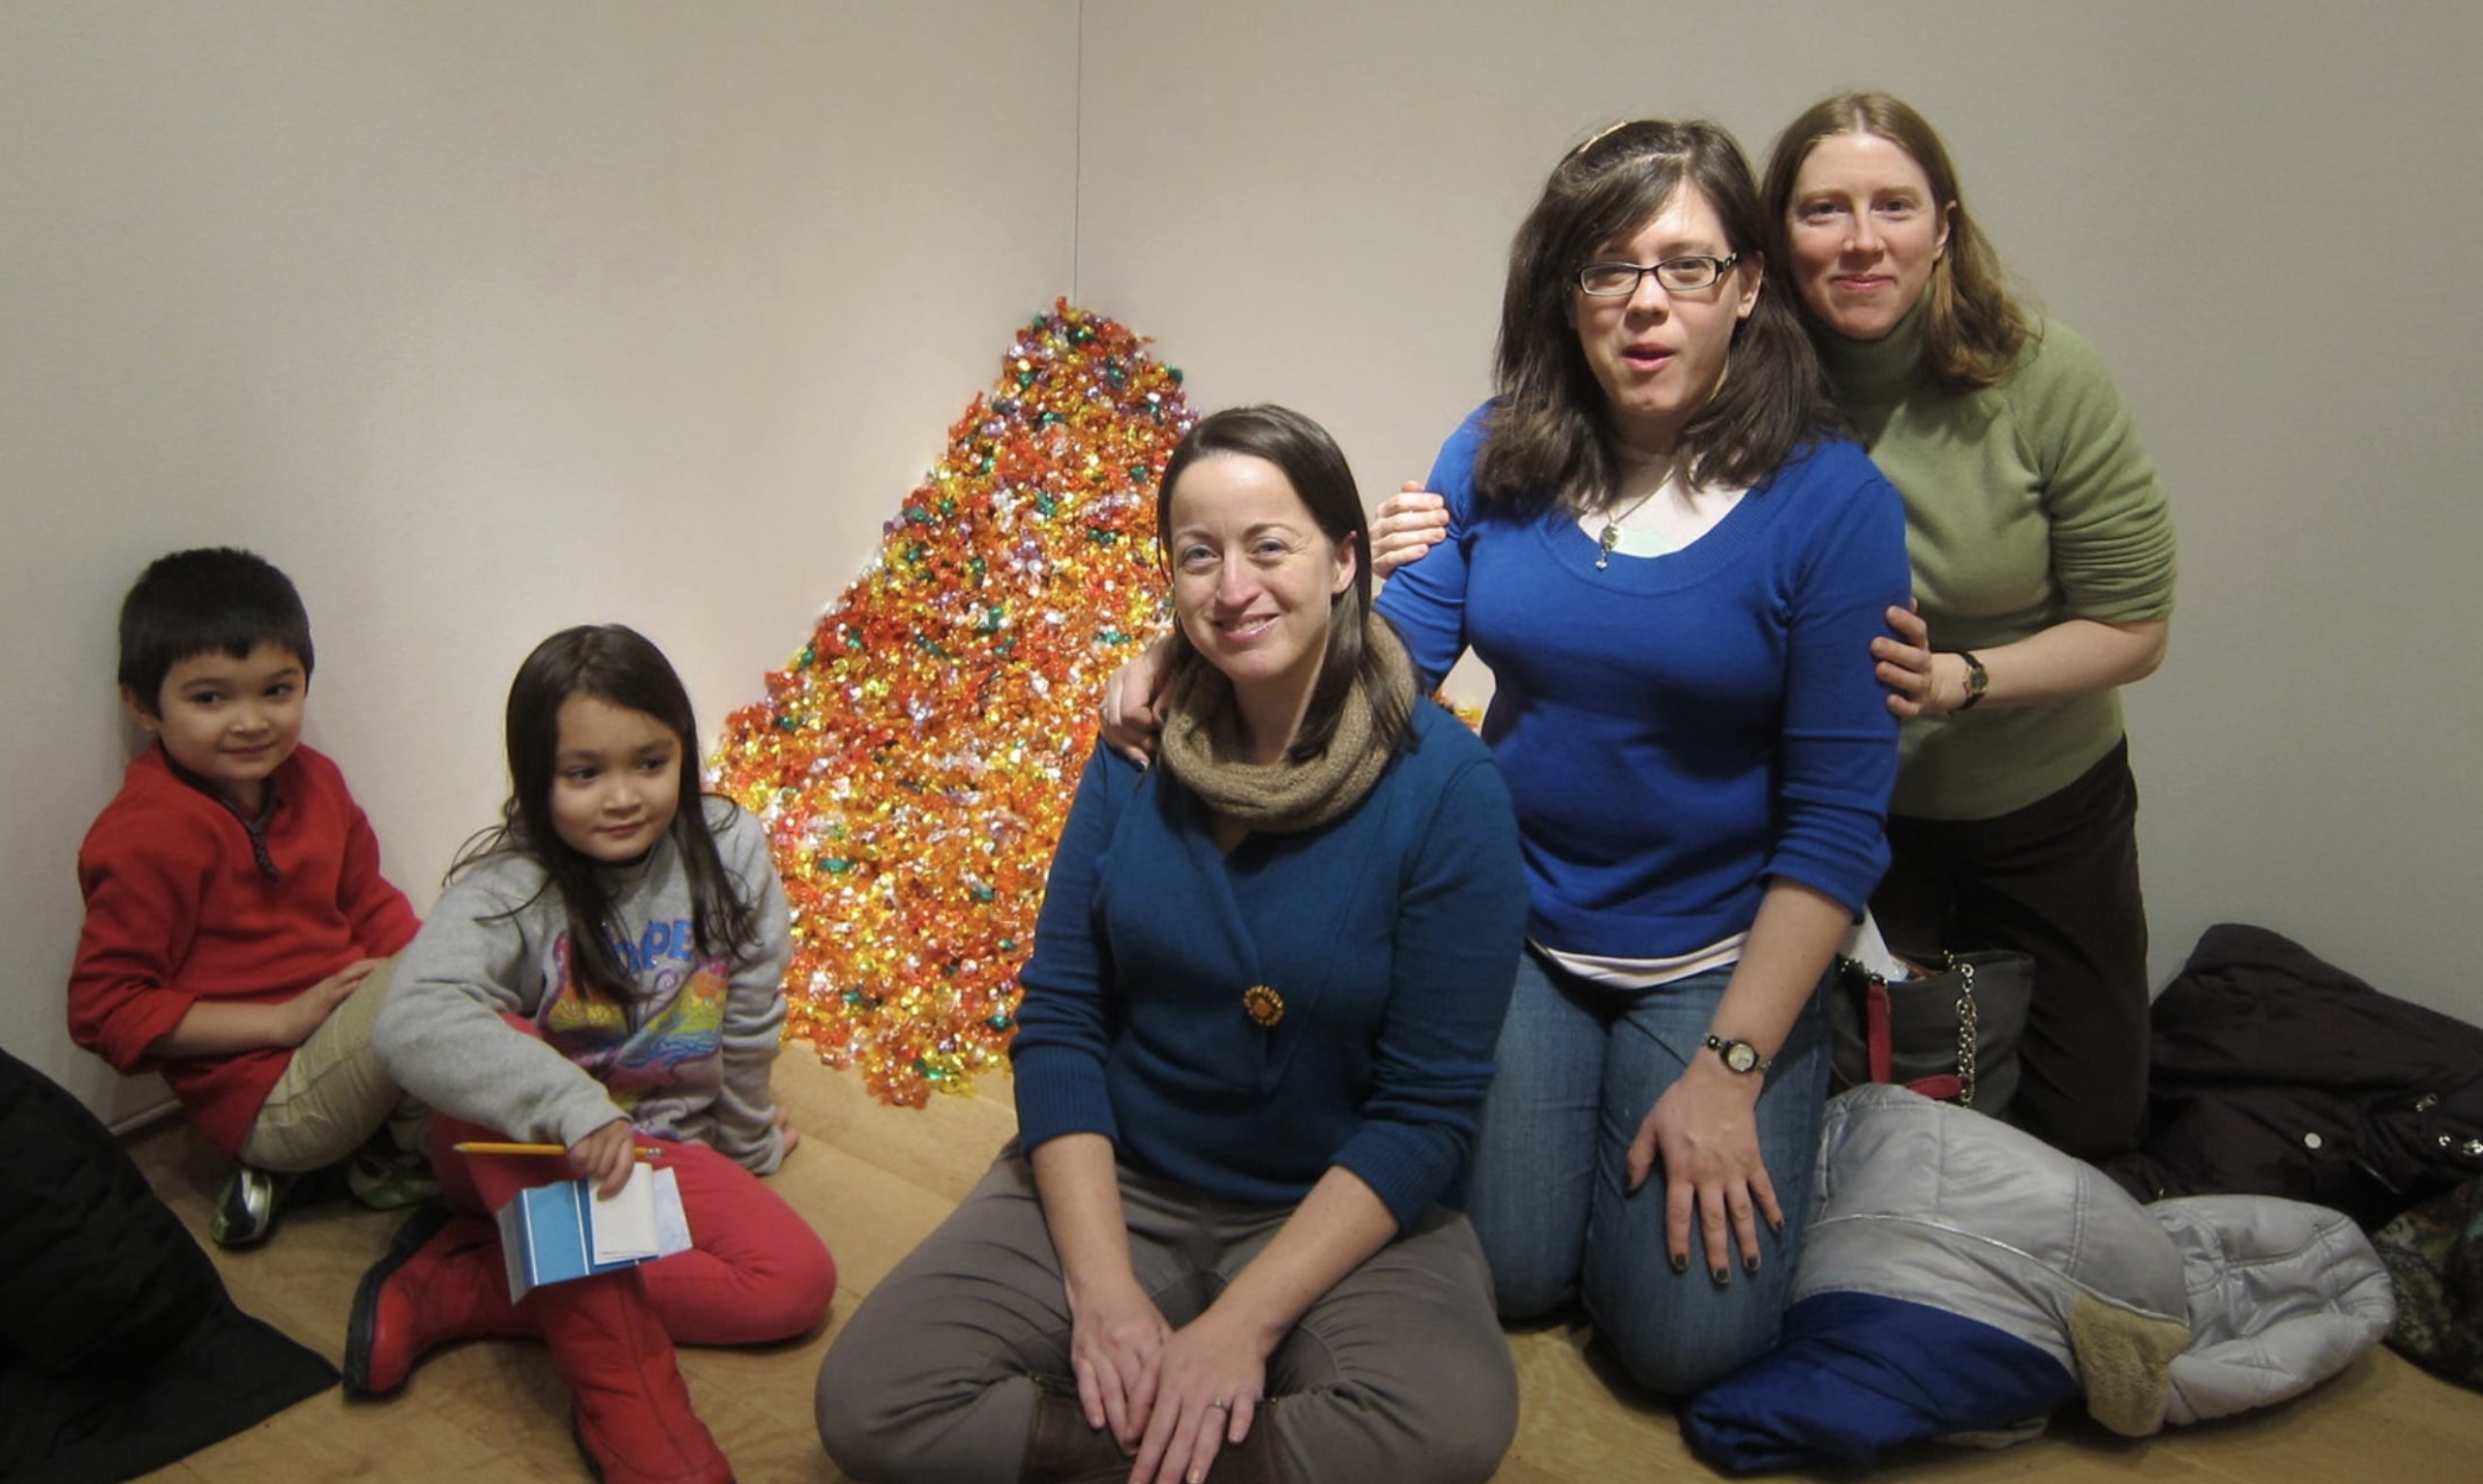 A picture of a group of people posing next to a large pile of candy in a museum.